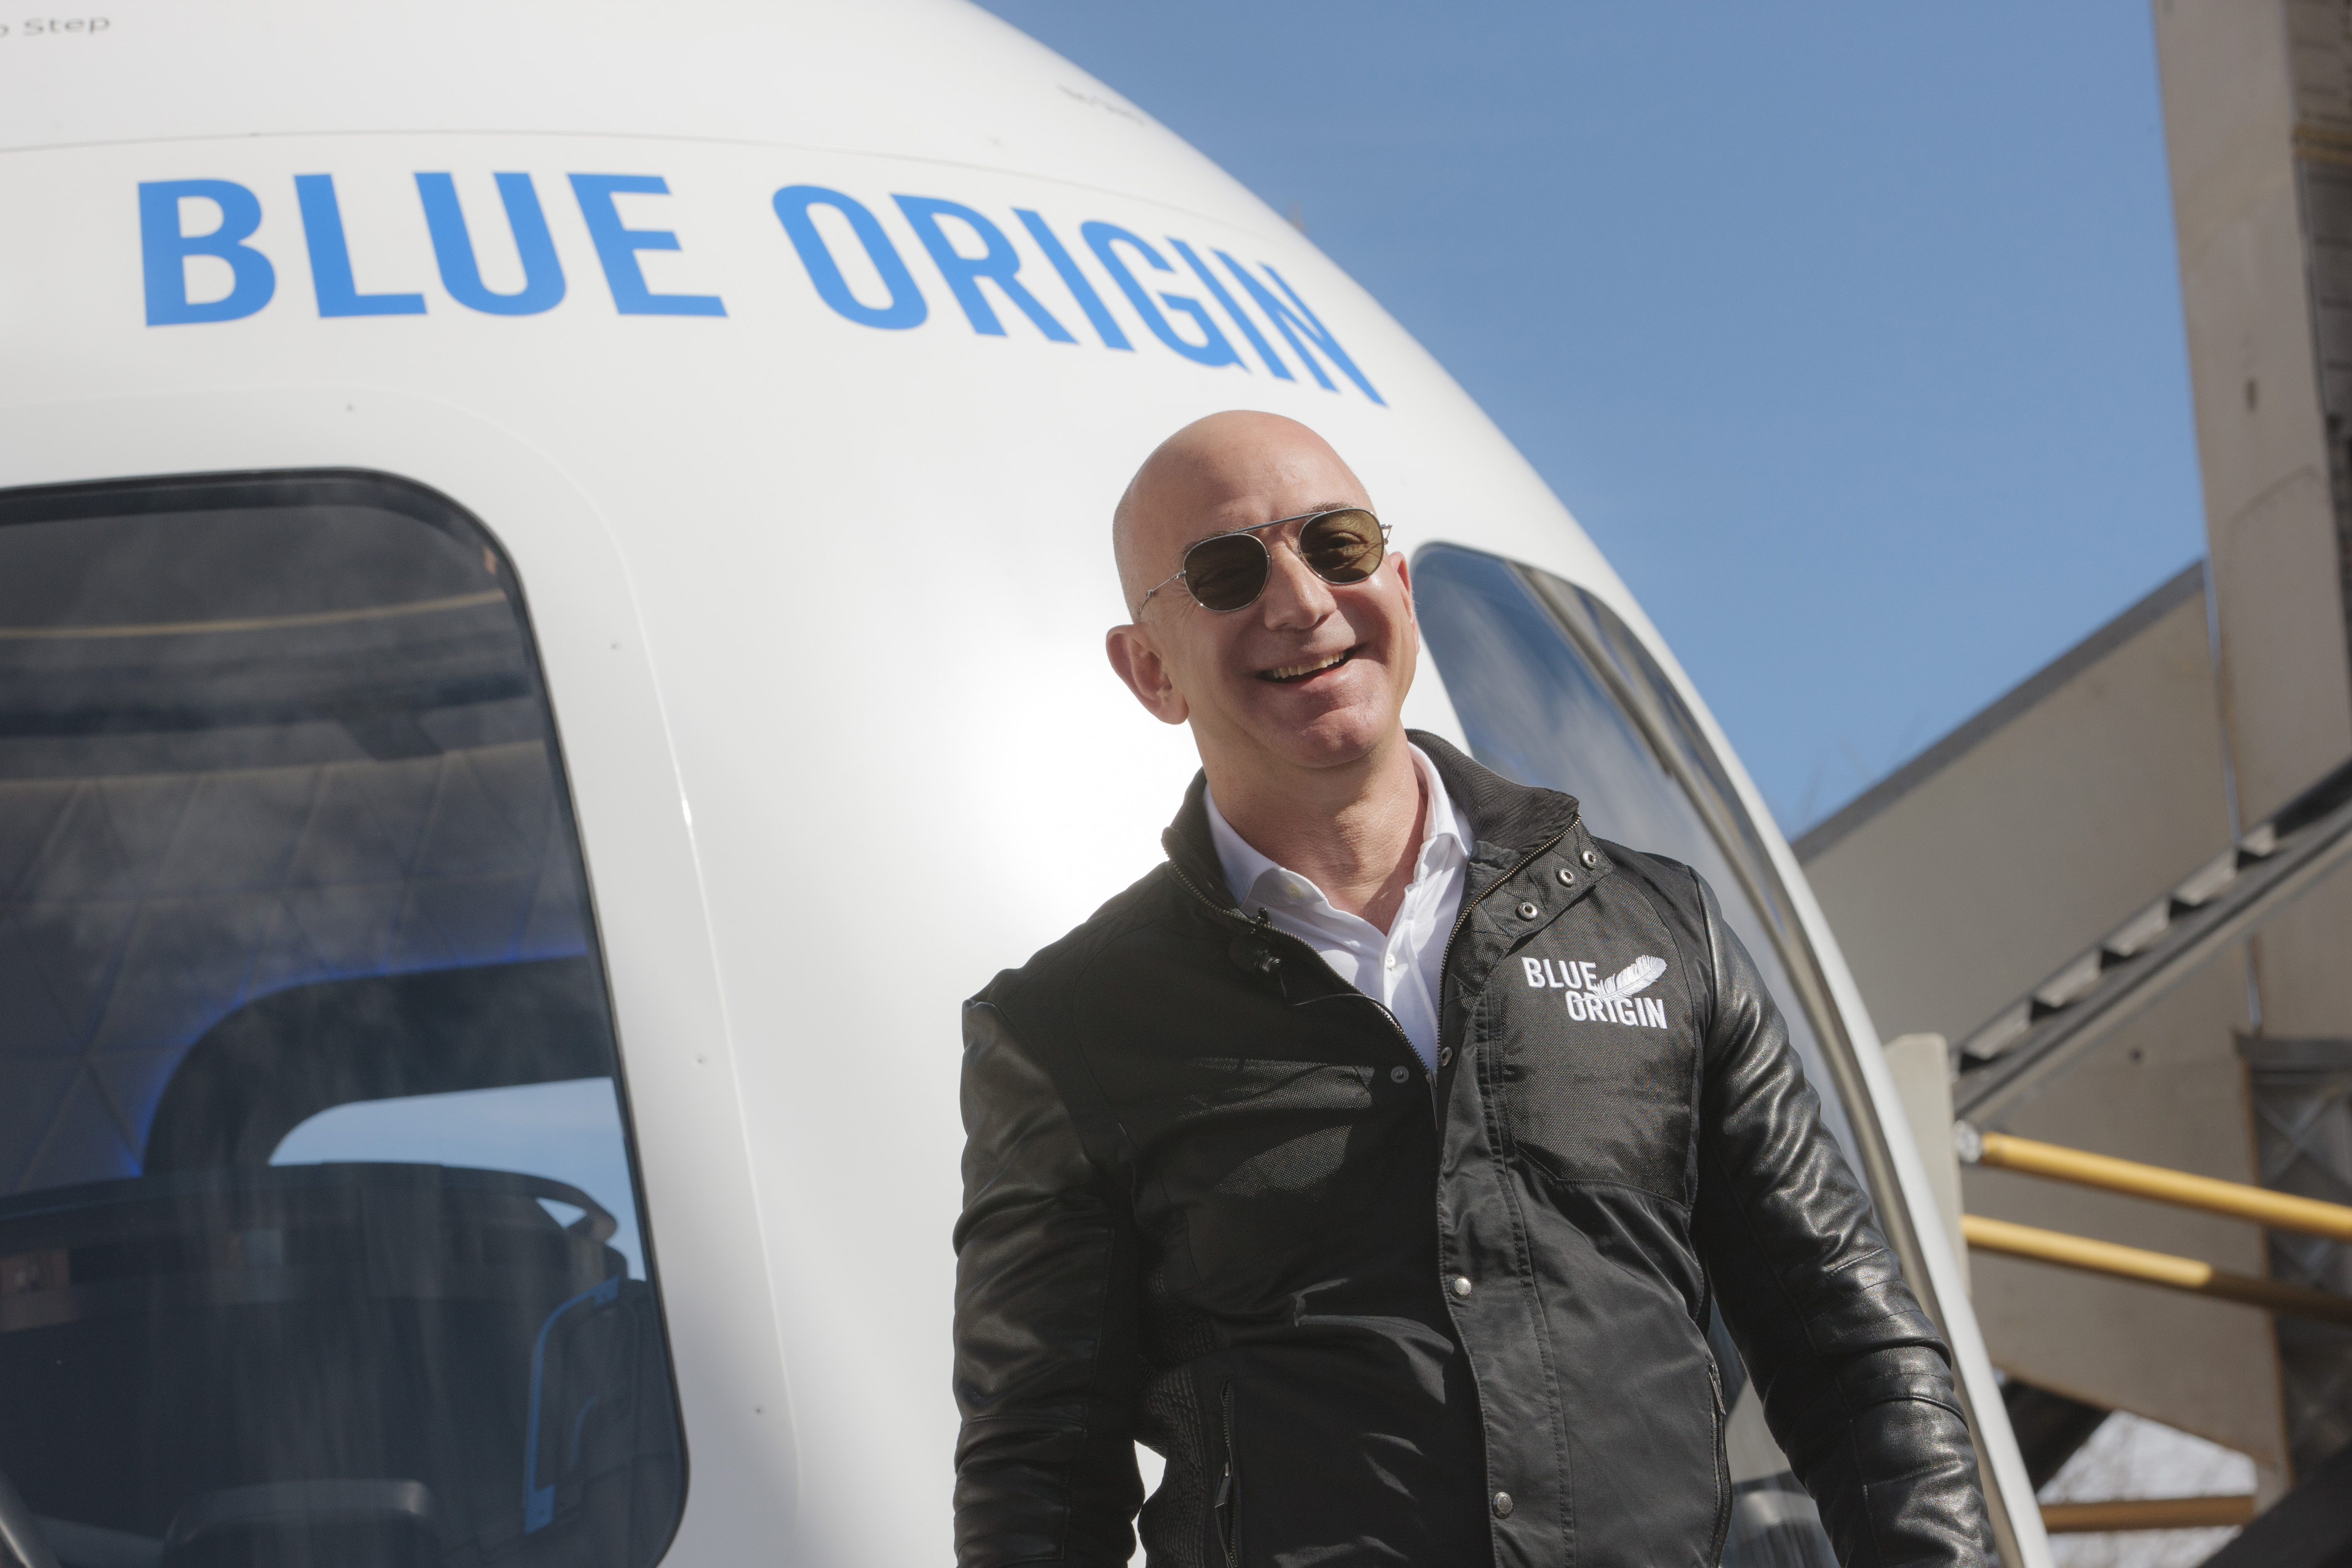 Jeff Bezos' Blue Origin Will Launch to Space Tuesday. What to Know and
How to Watch